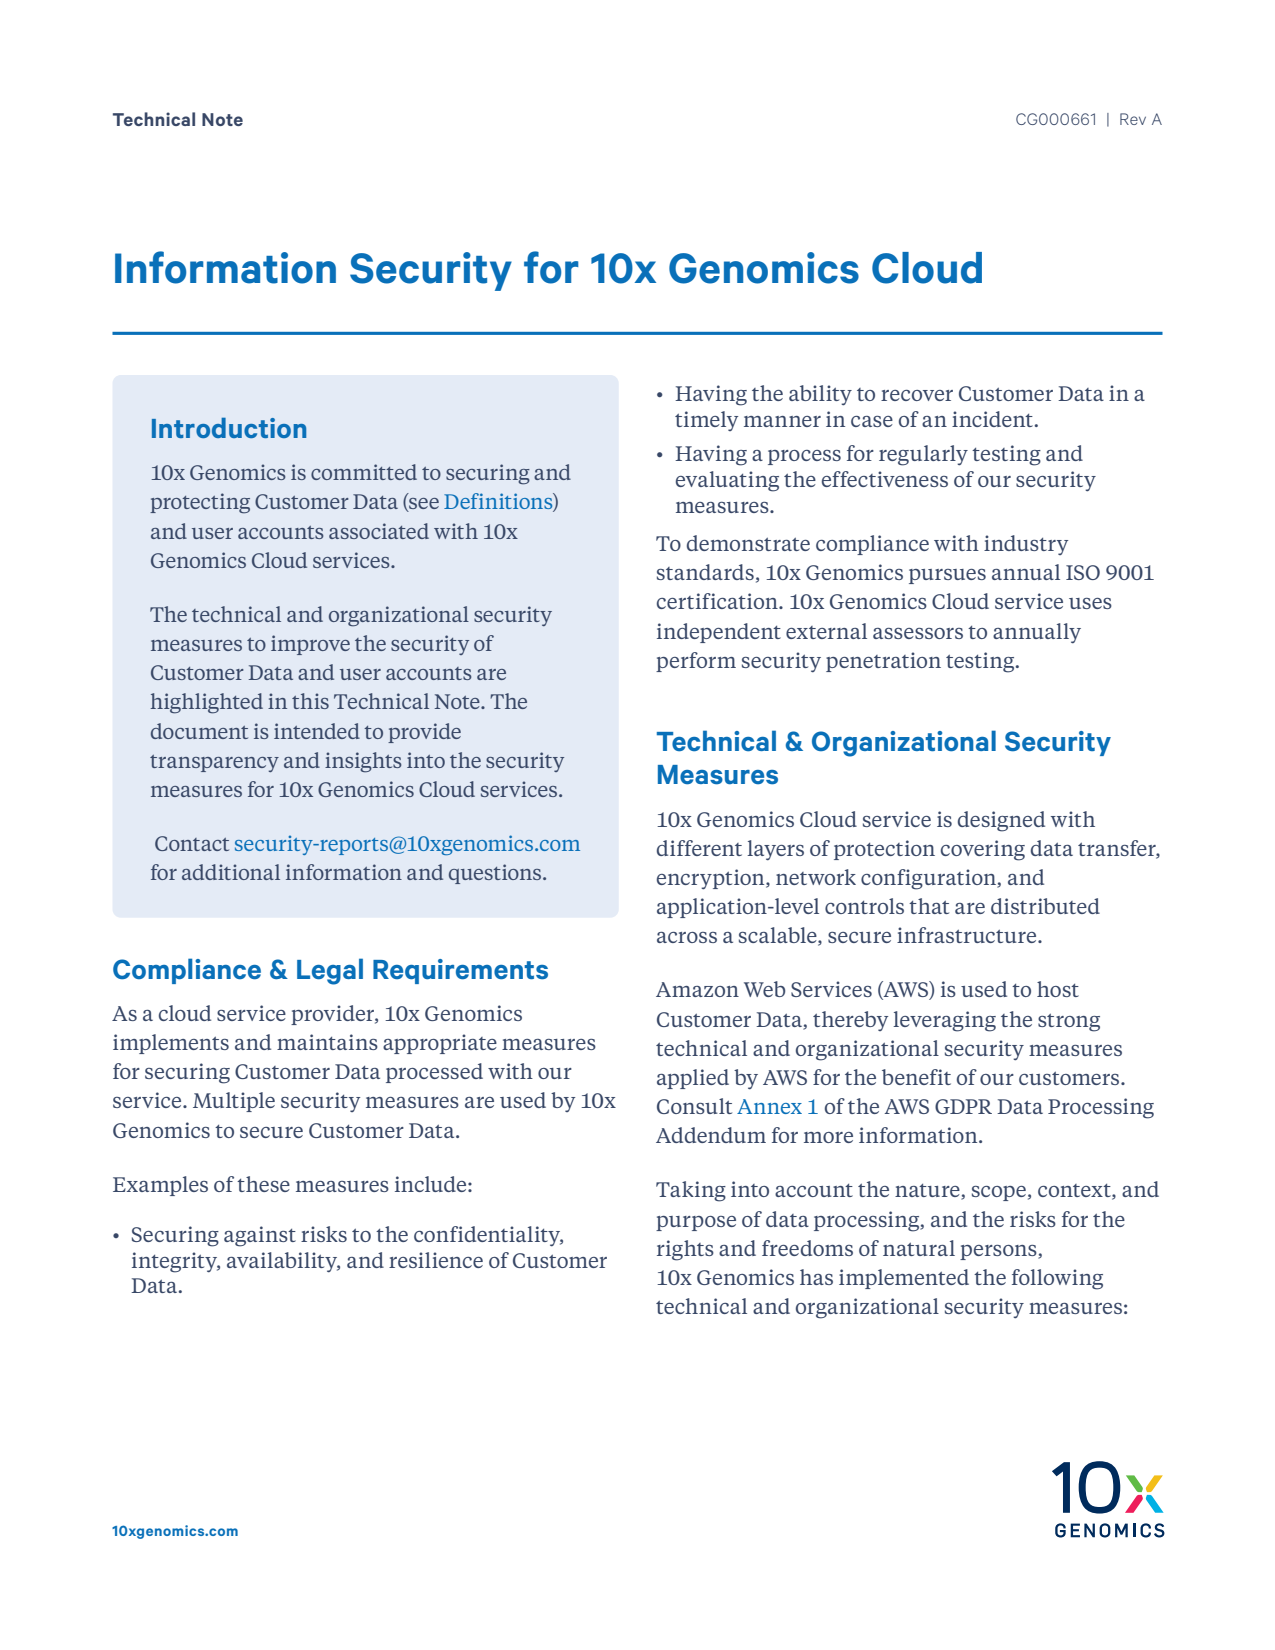 Information Security for 10x Genomics Cloud Whitepaper